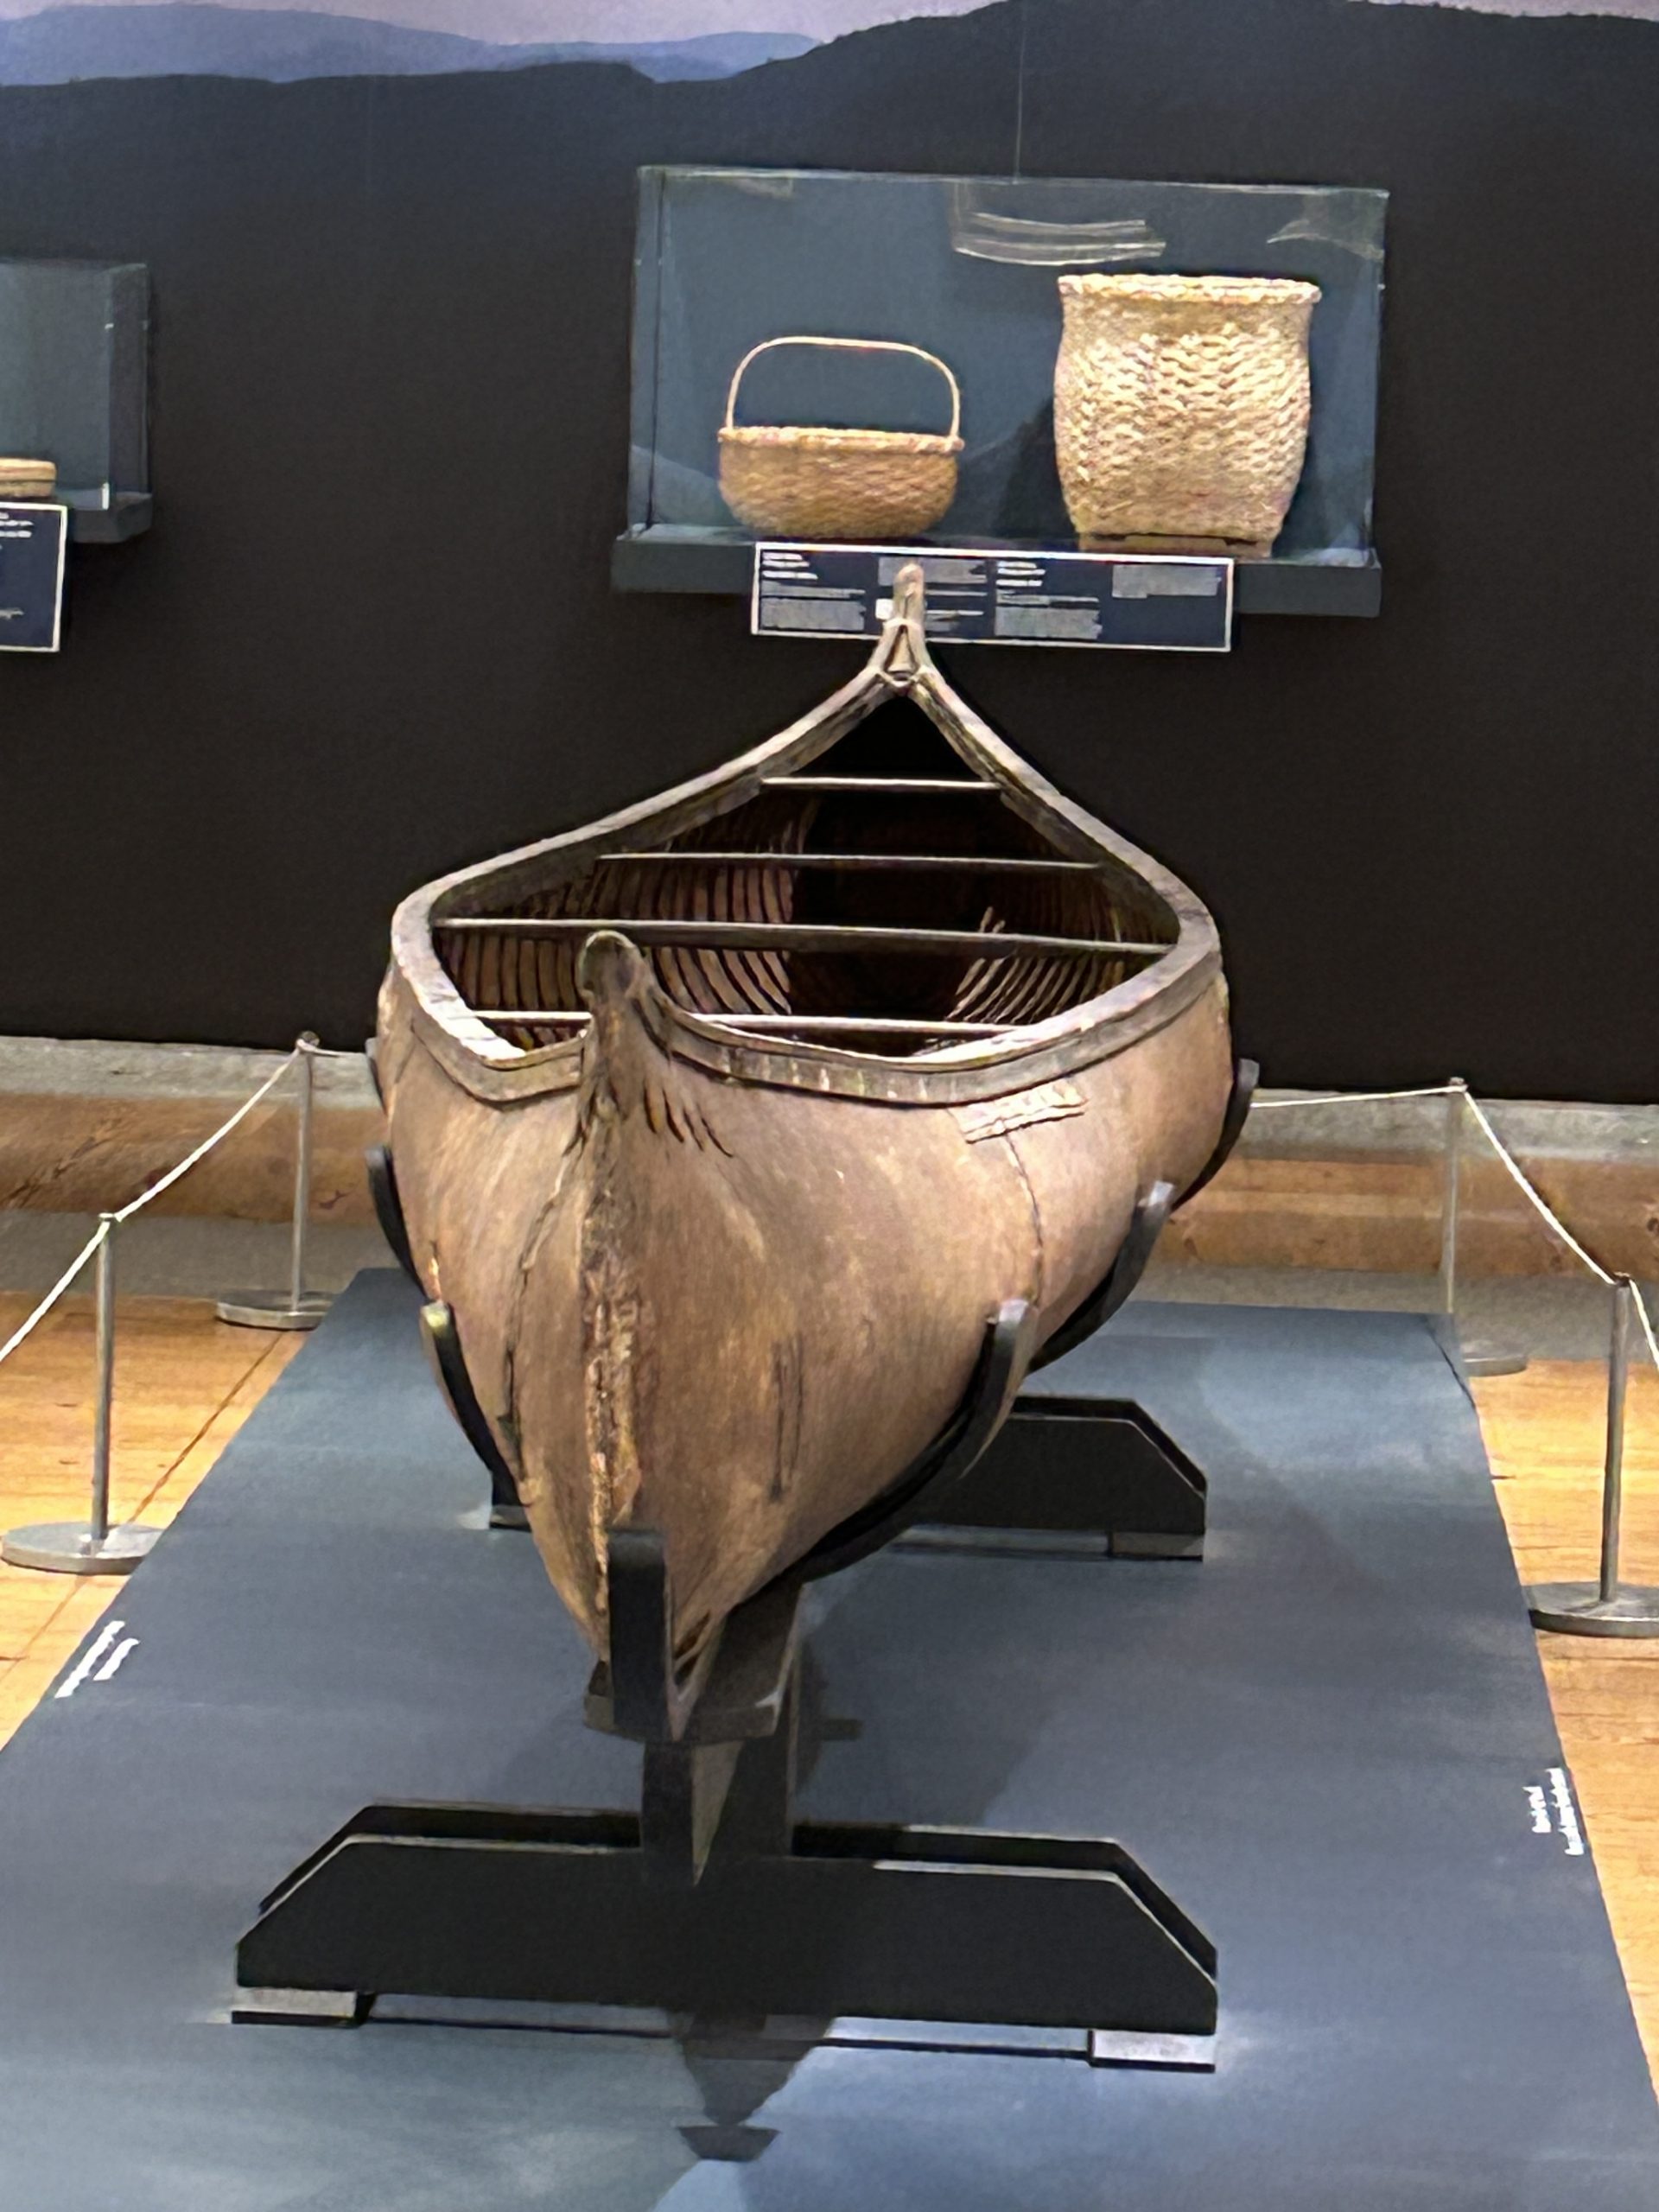 Image of a birchbark canoe in a museum exhibit with baskets in a case behind it.